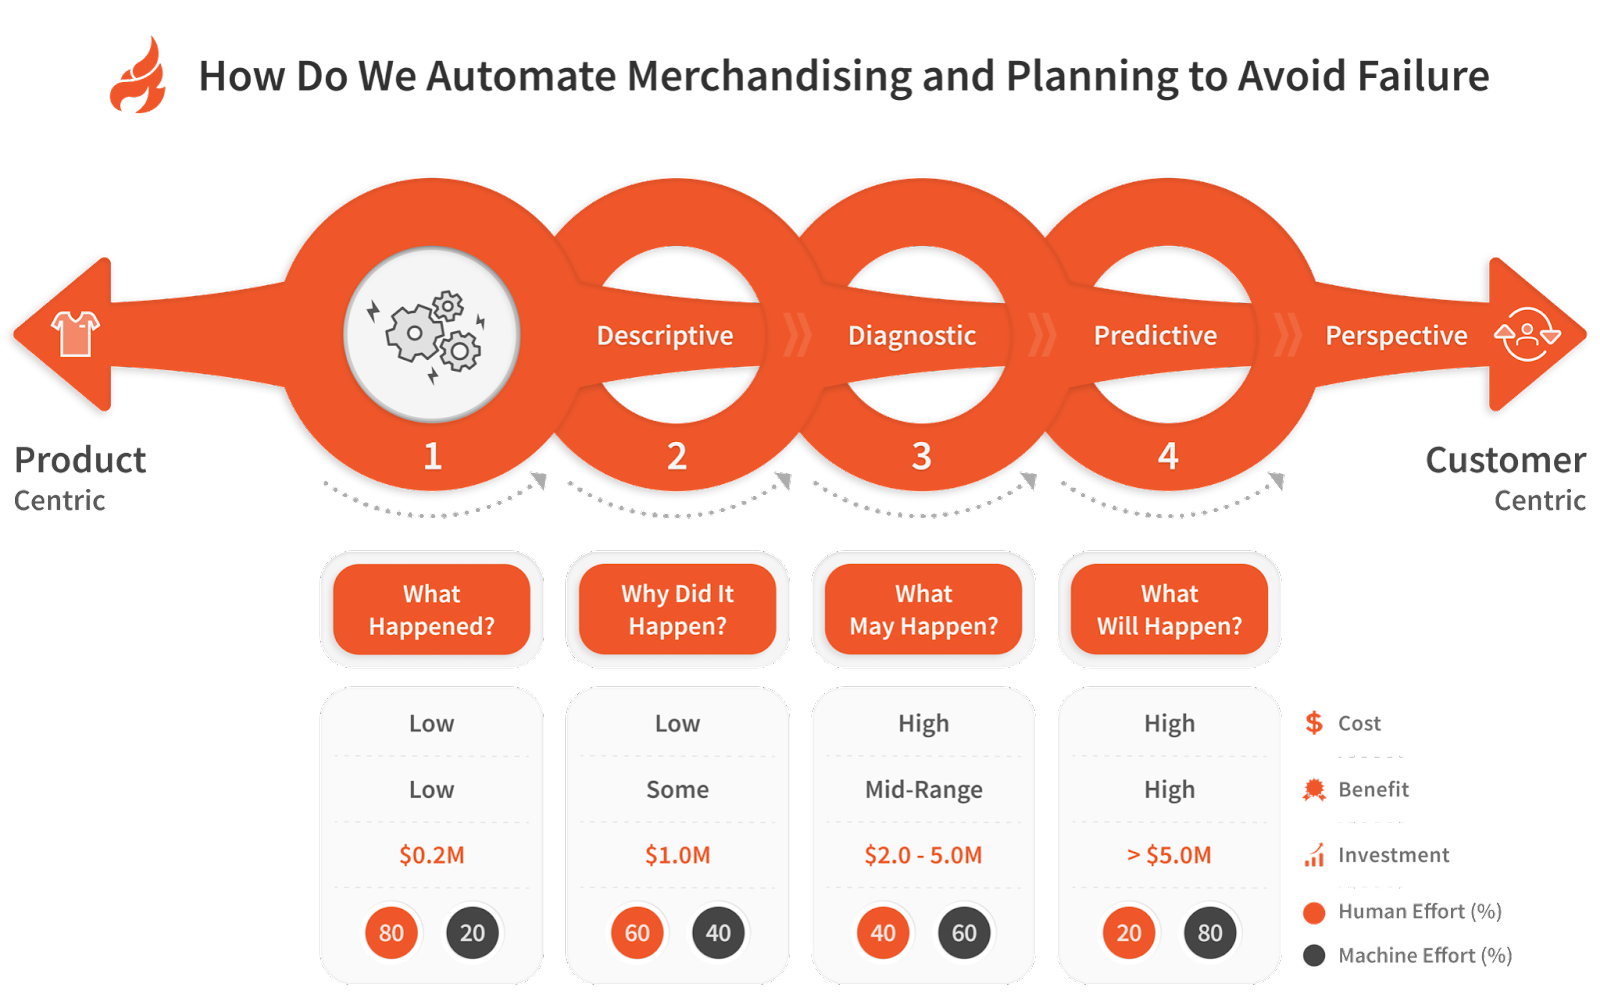 How Allerin Automated Merchandising and Planning to Avoid Failure